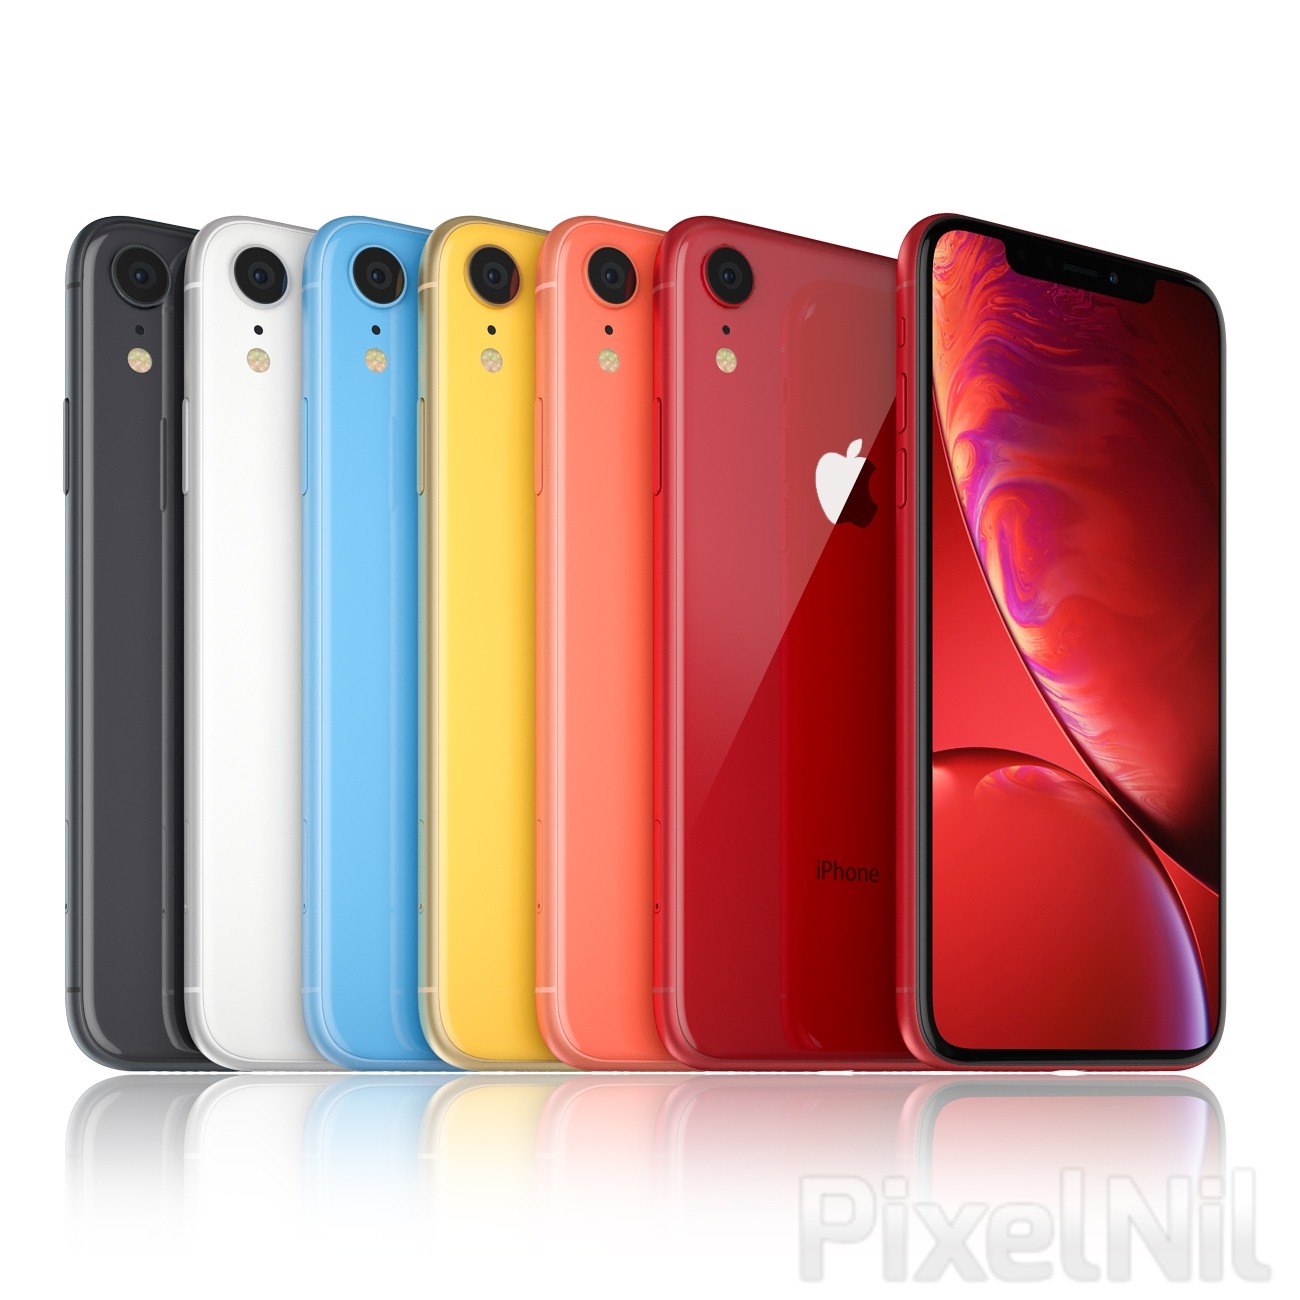 Apple iPhone Xr and XS All colors